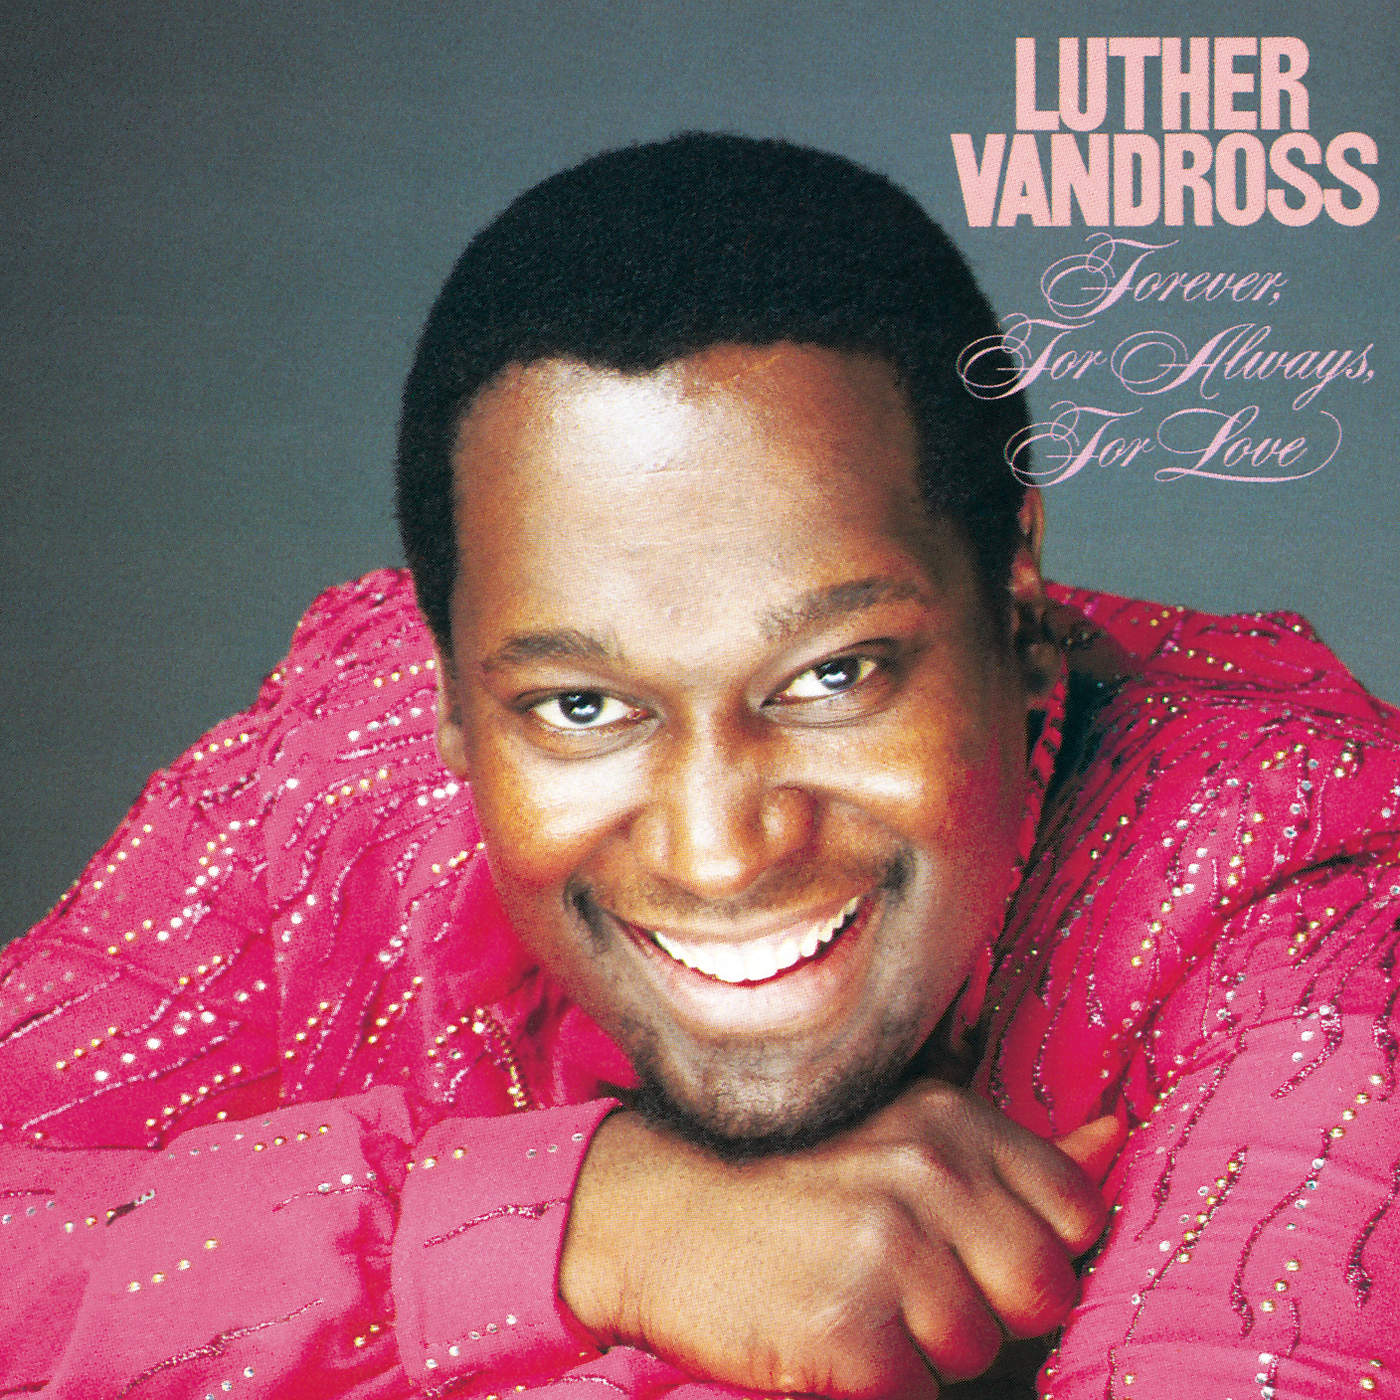 Art for Promise Me by Luther Vandross